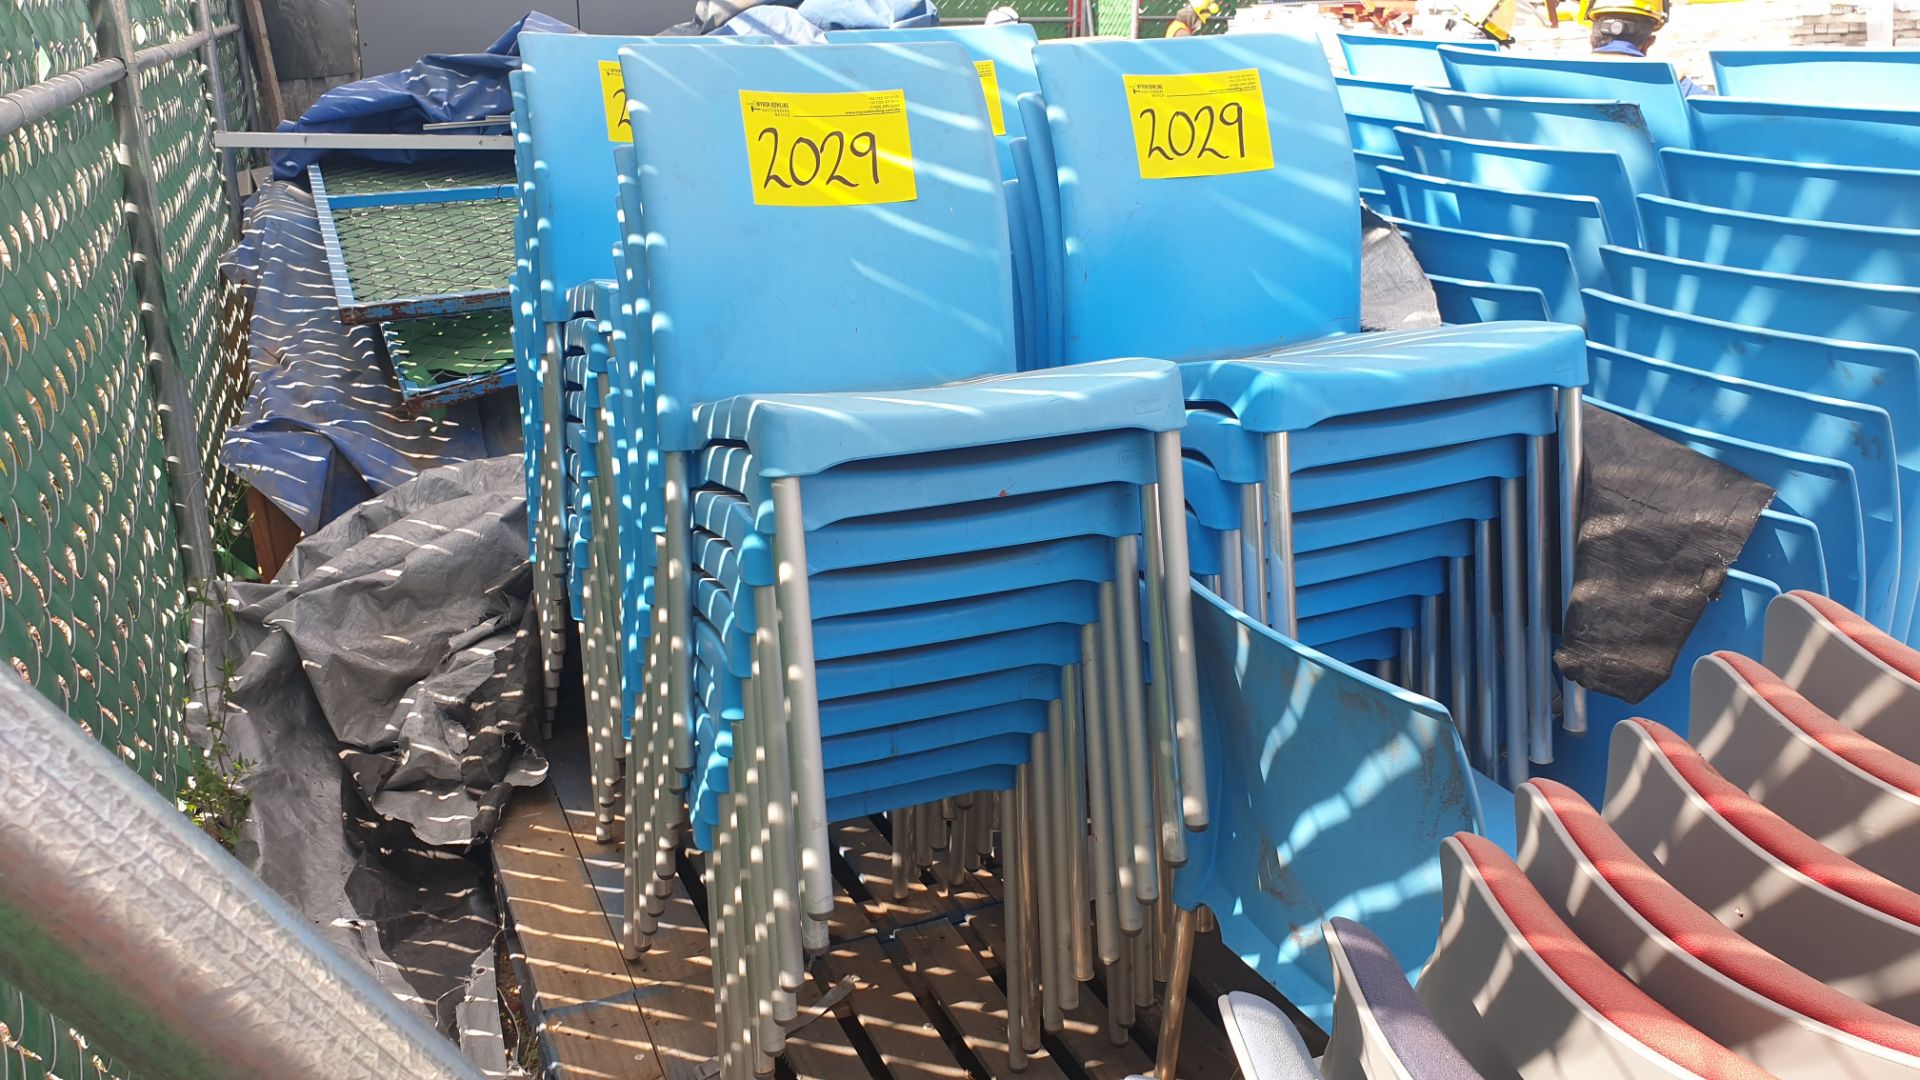 1 Lote of 40 blue plastic chairs, 7 metal chairs for office with backrest and upholstered seat - Bild 14 aus 22